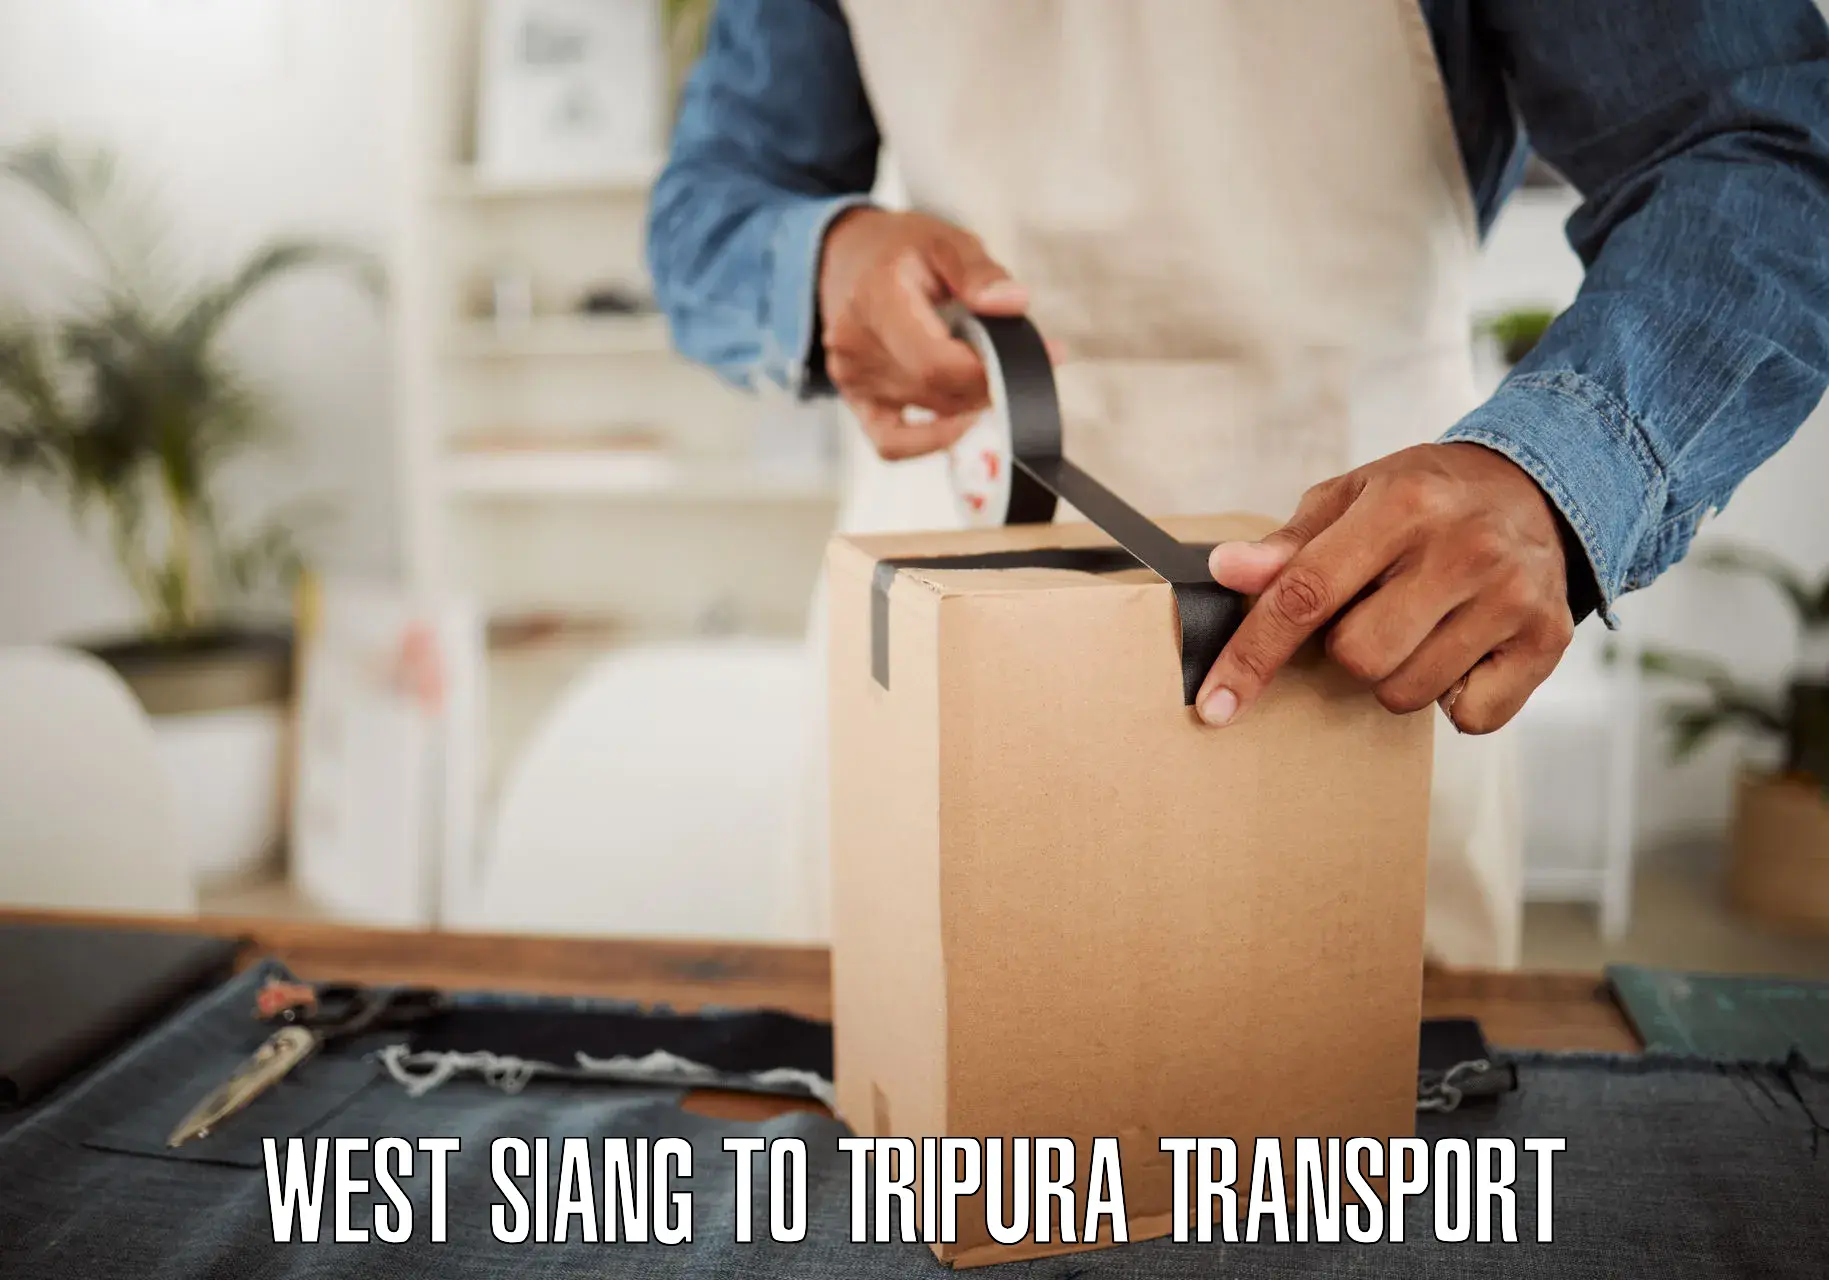 Express transport services West Siang to Tripura